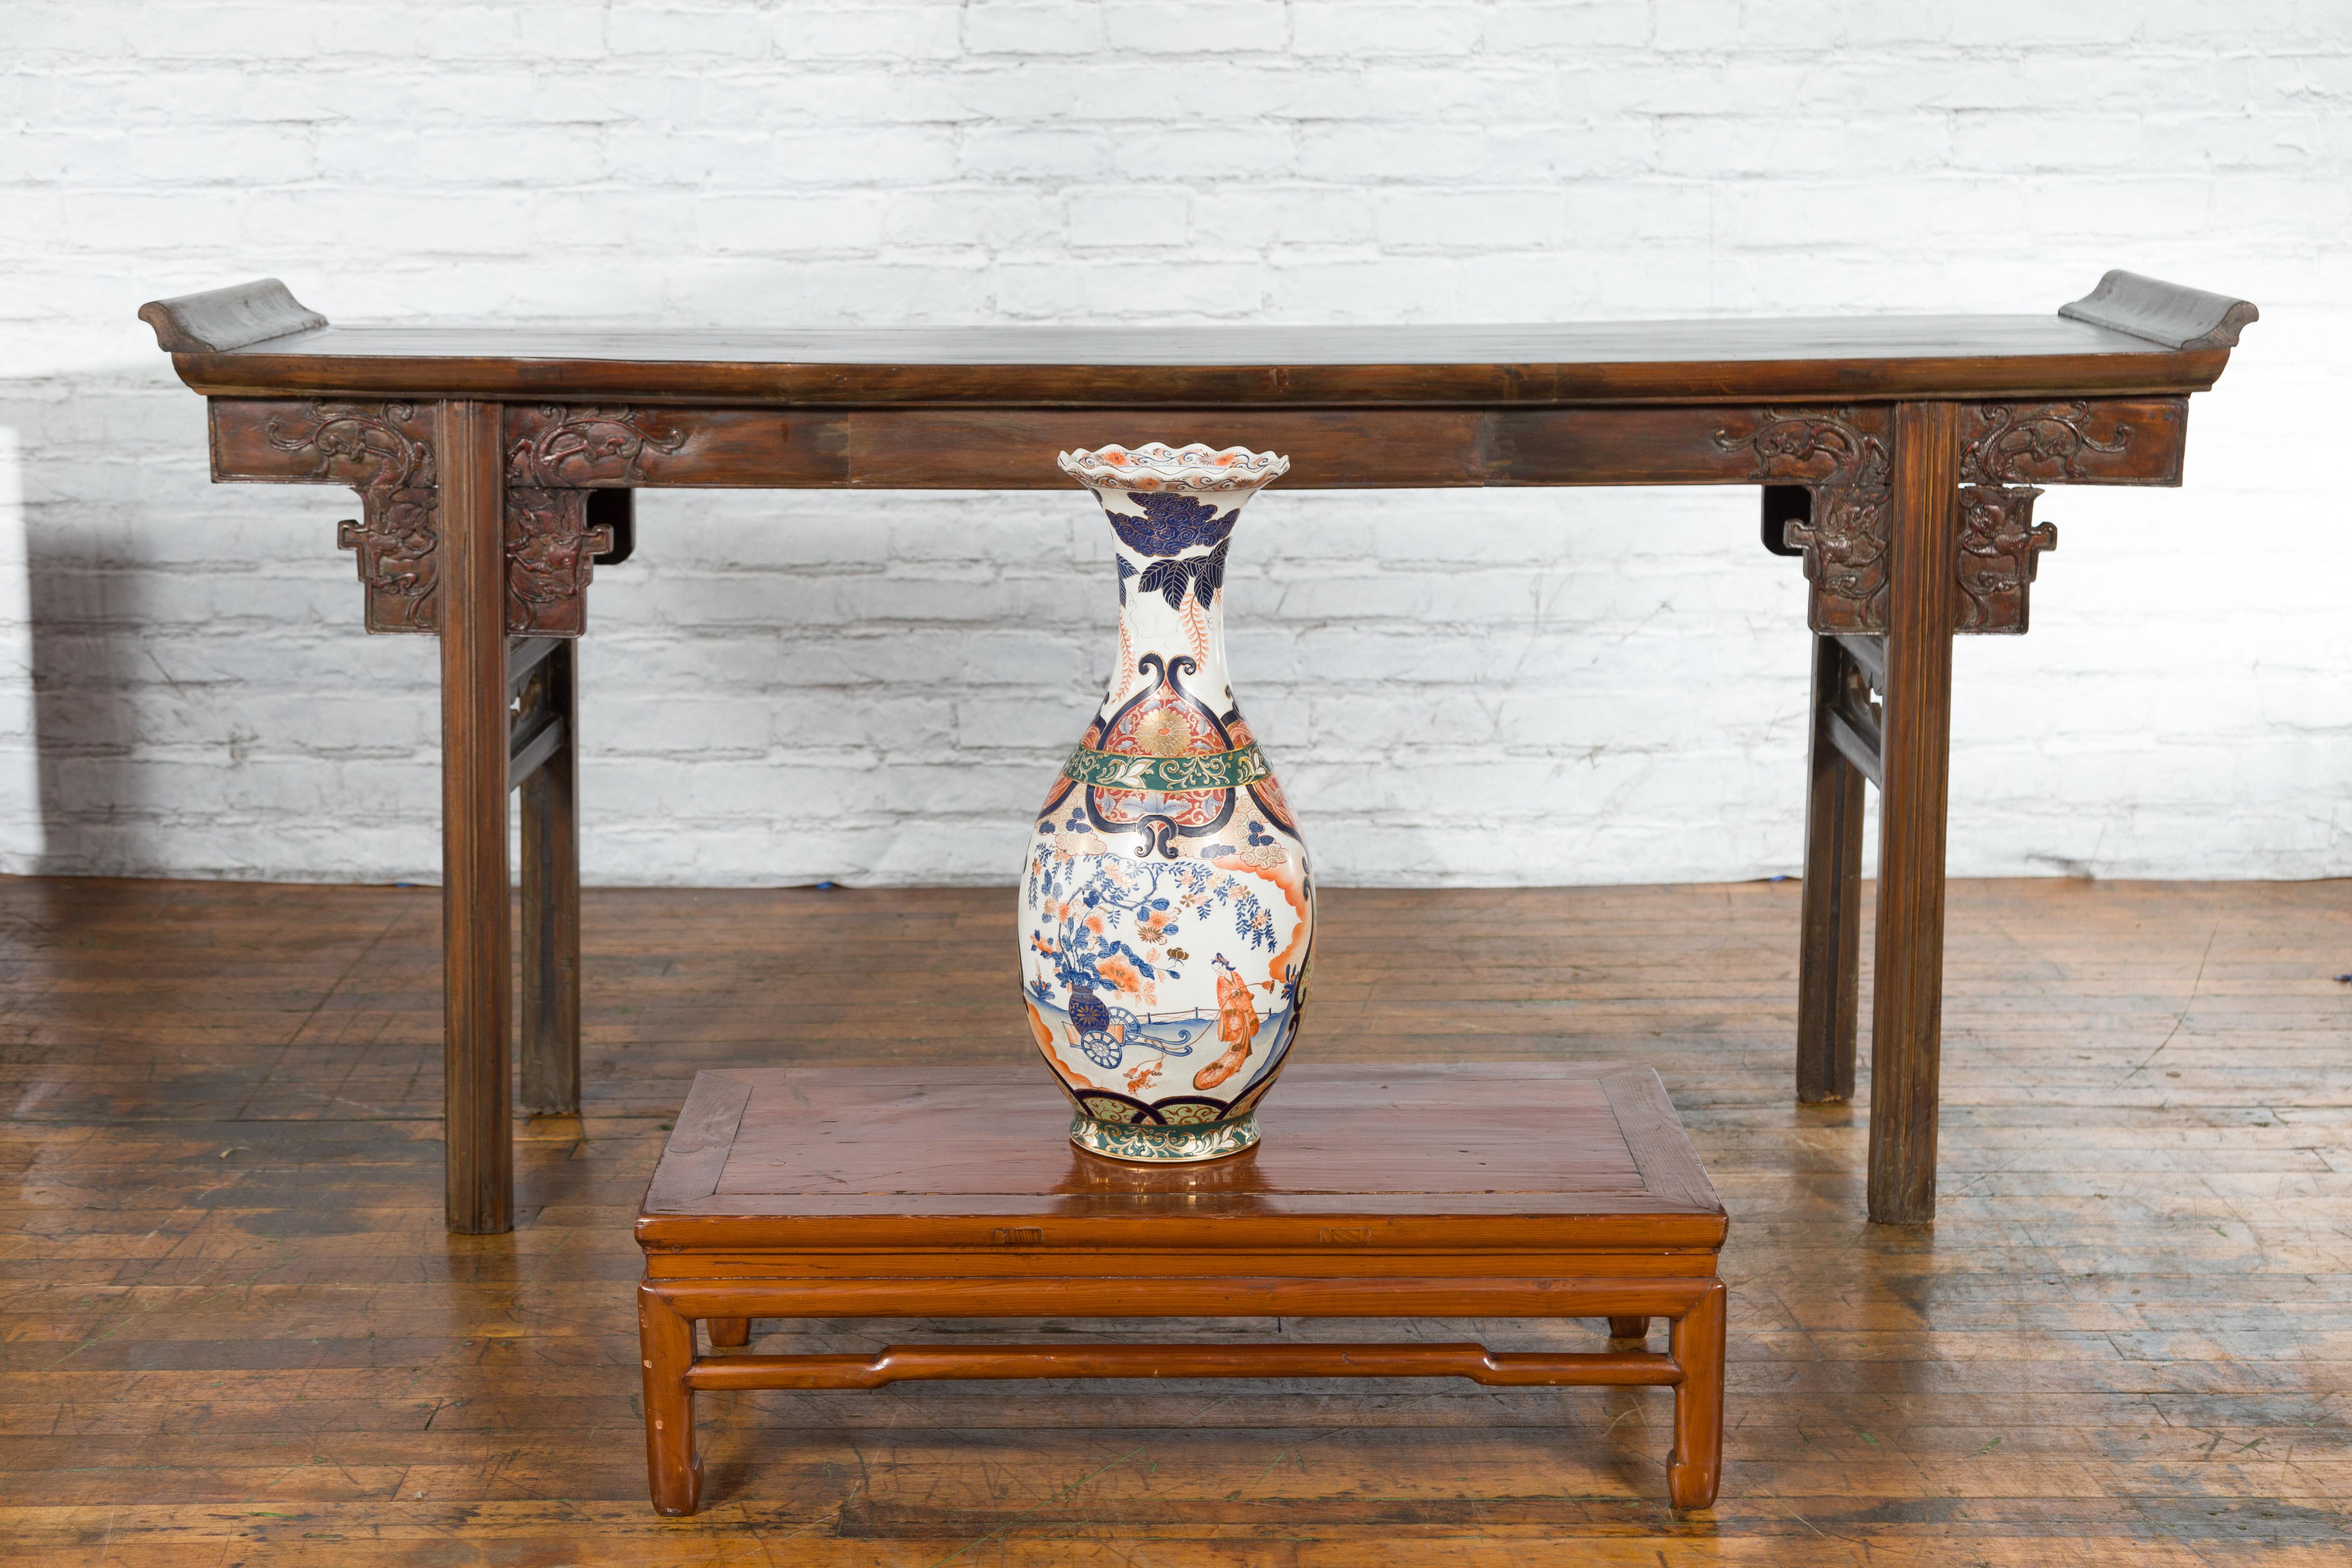 A Chinese vintage Imari style palace vase from the mid-20th century, with scalloped top, orange, blue and green décor as well as people, architecture and landscape motifs. Created in China during the Midcentury period, this Imari style palace vase